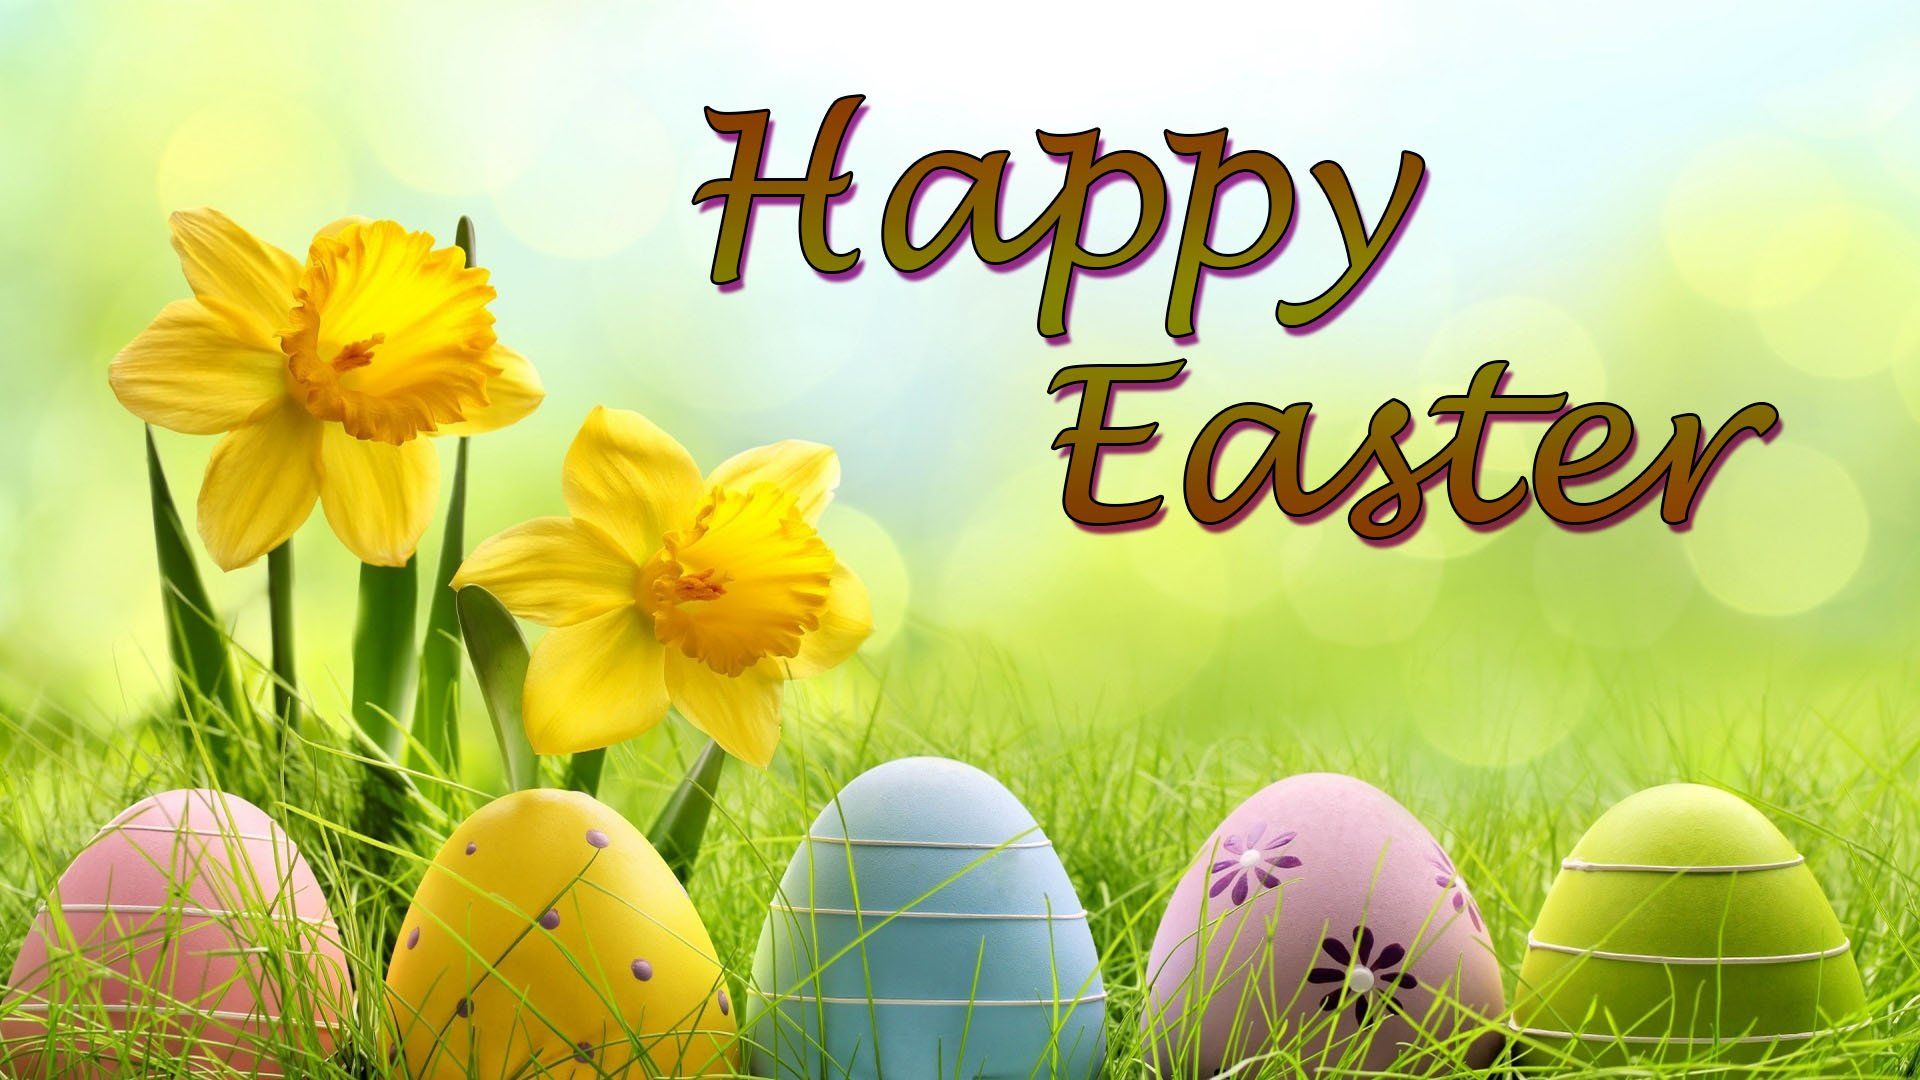 Happy Easter Image, Picture & HD Wallpaper